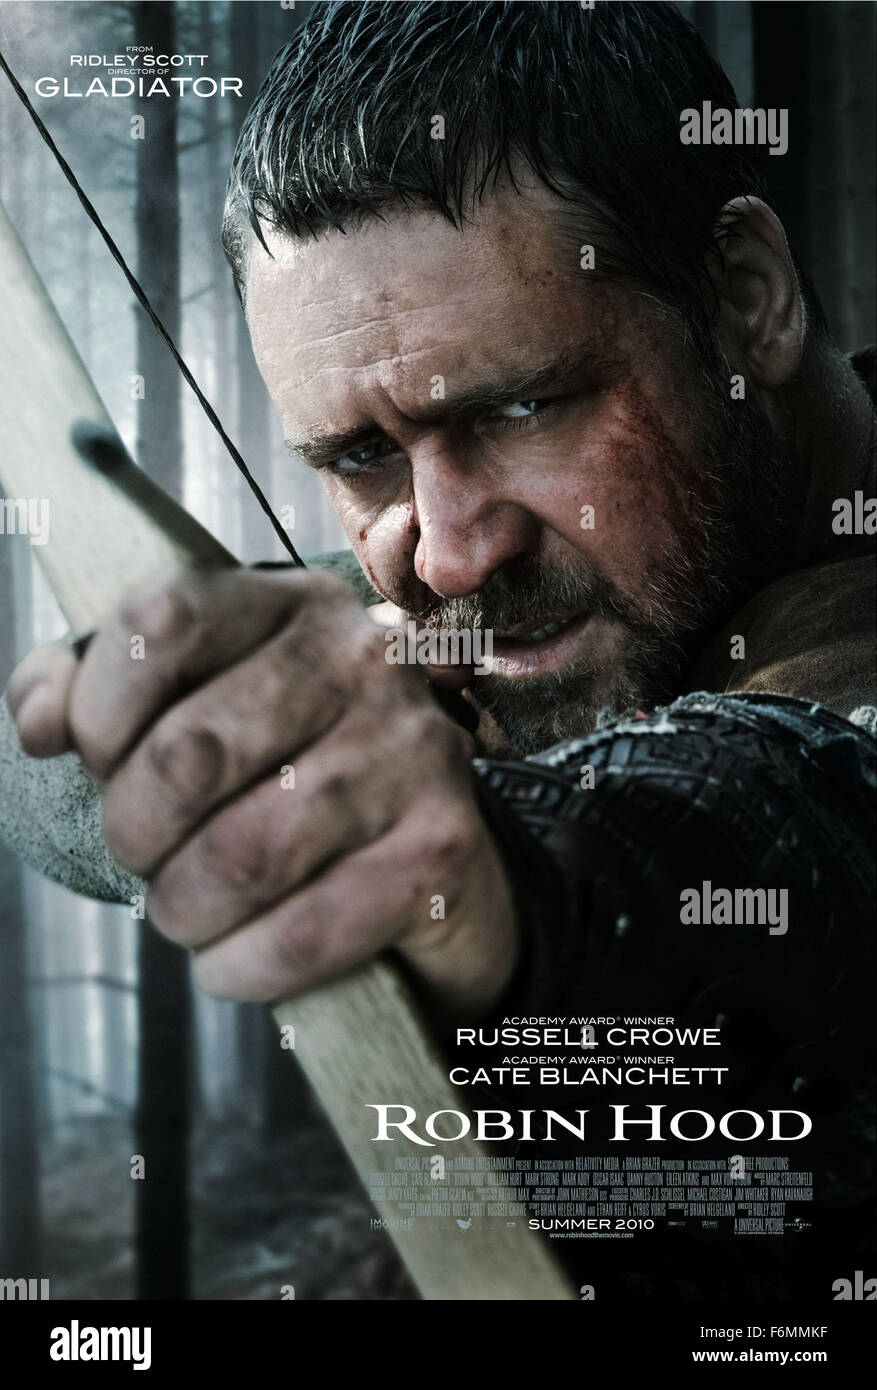 RELEASE DATE: May 14, 2010   MOVIE TITLE: Robin Hood   STUDIO: Universal Pictures   DIRECTOR: Ridley Scott   PLOT: The story of an archer in the army of Richard Coeur de Lion who fights against the Norman invaders and becomes the legendary hero known as Robin Hood   PICTURED: Poster Art. RUSSELL CROWE as Robin Hood   (Credit Image: c Universal Pictures/Entertainment Pictures) Stock Photo